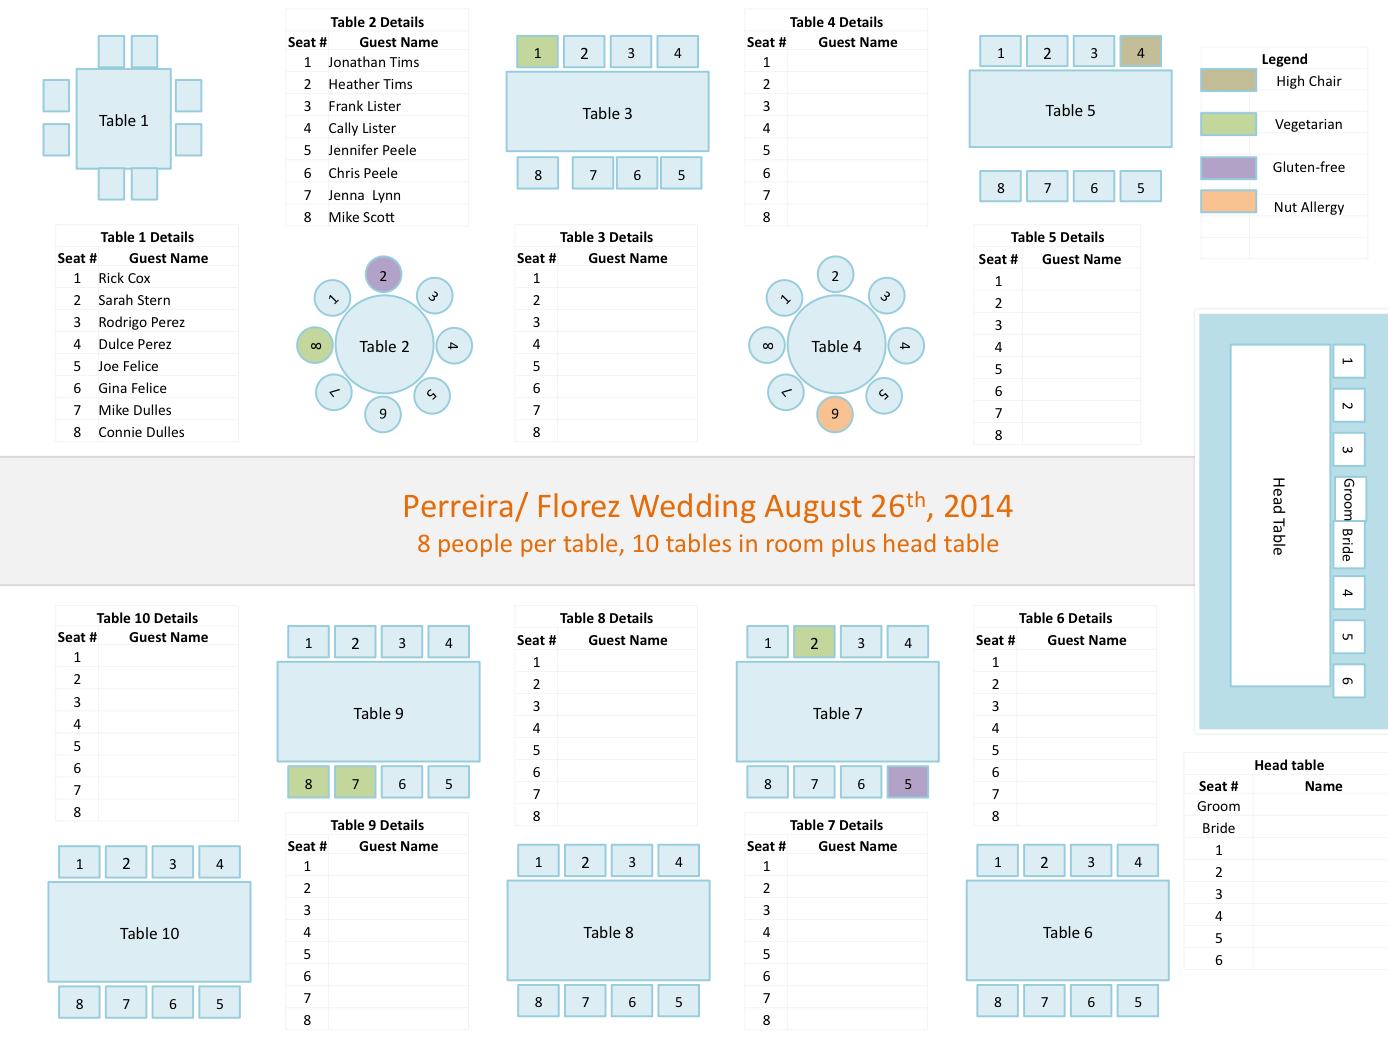 Wedding Planners Tools PowerPoint Template for Seating Charts wpic.ca